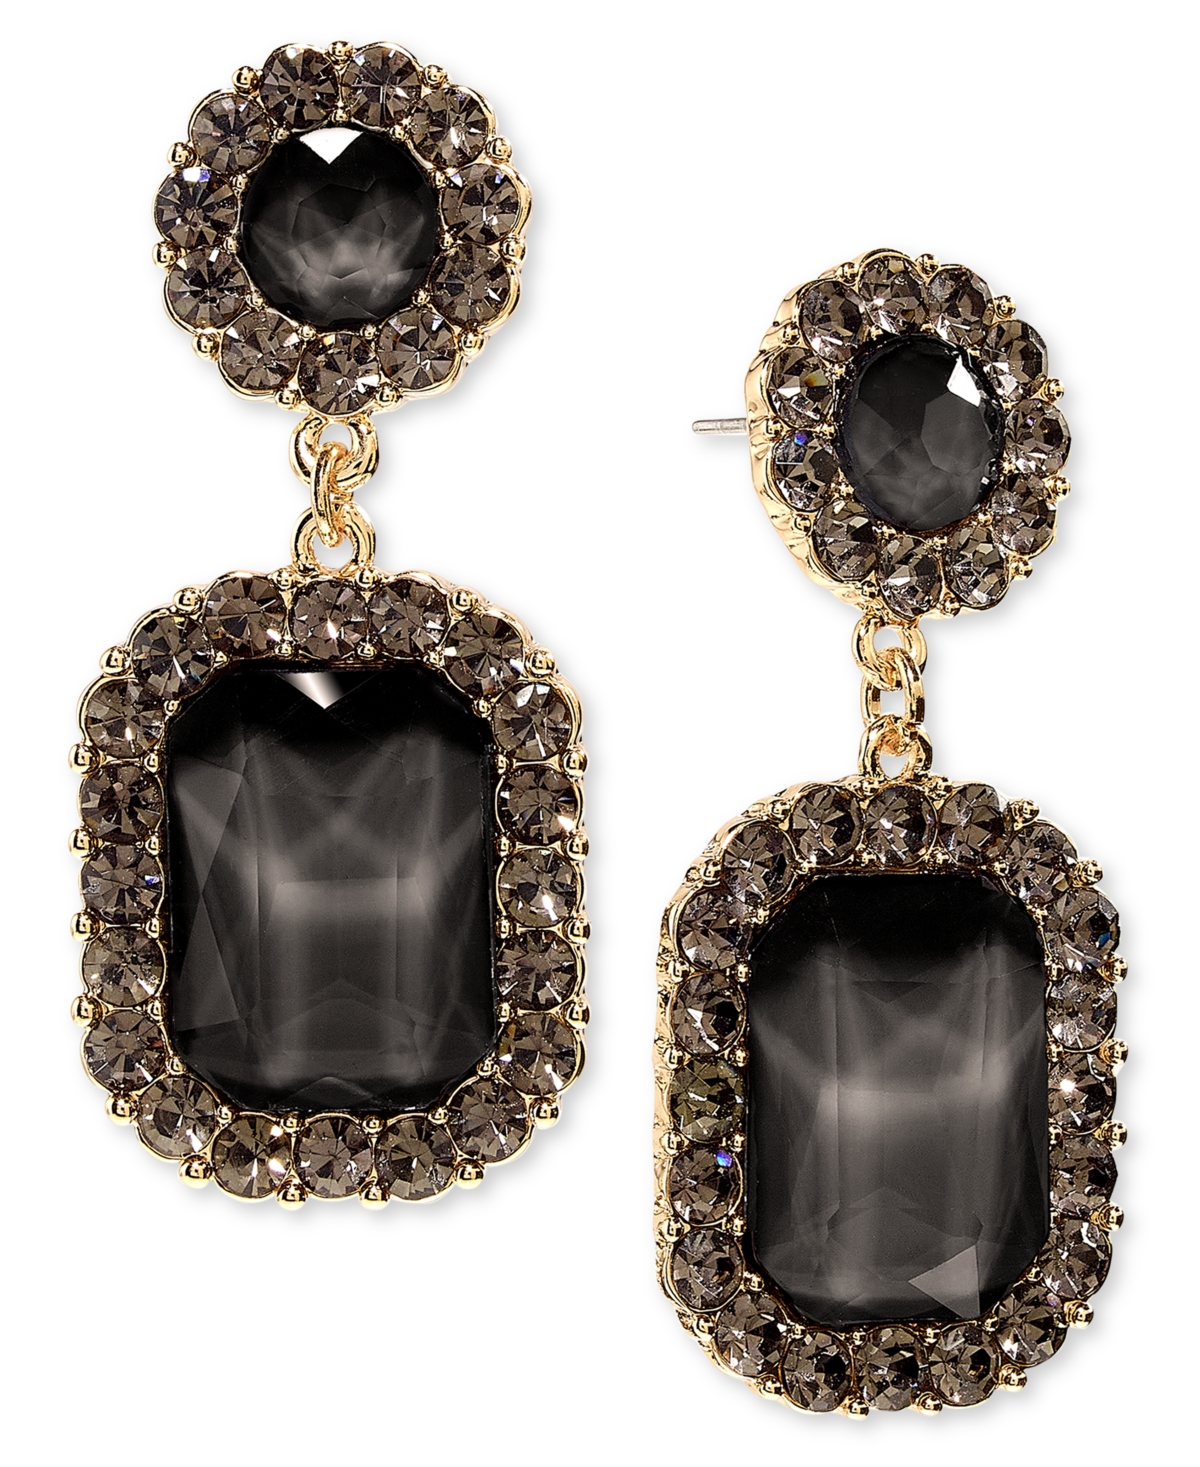 Gold-Tone Stone Double Drop Earrings, Created for Macy's - Black